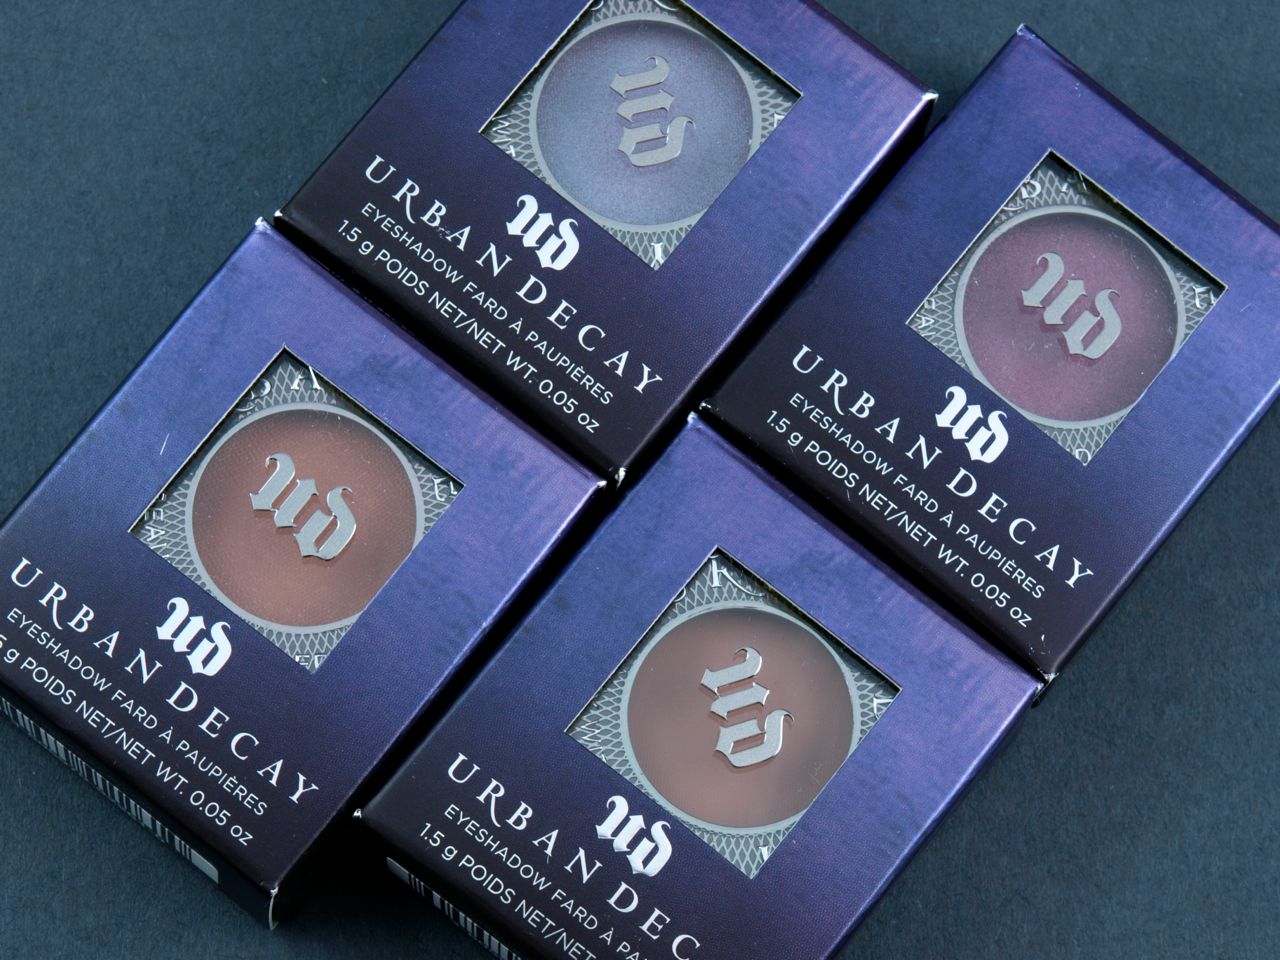 Urban Decay Summer 2015 New Single Eyeshadow Shades: Review and Swatches